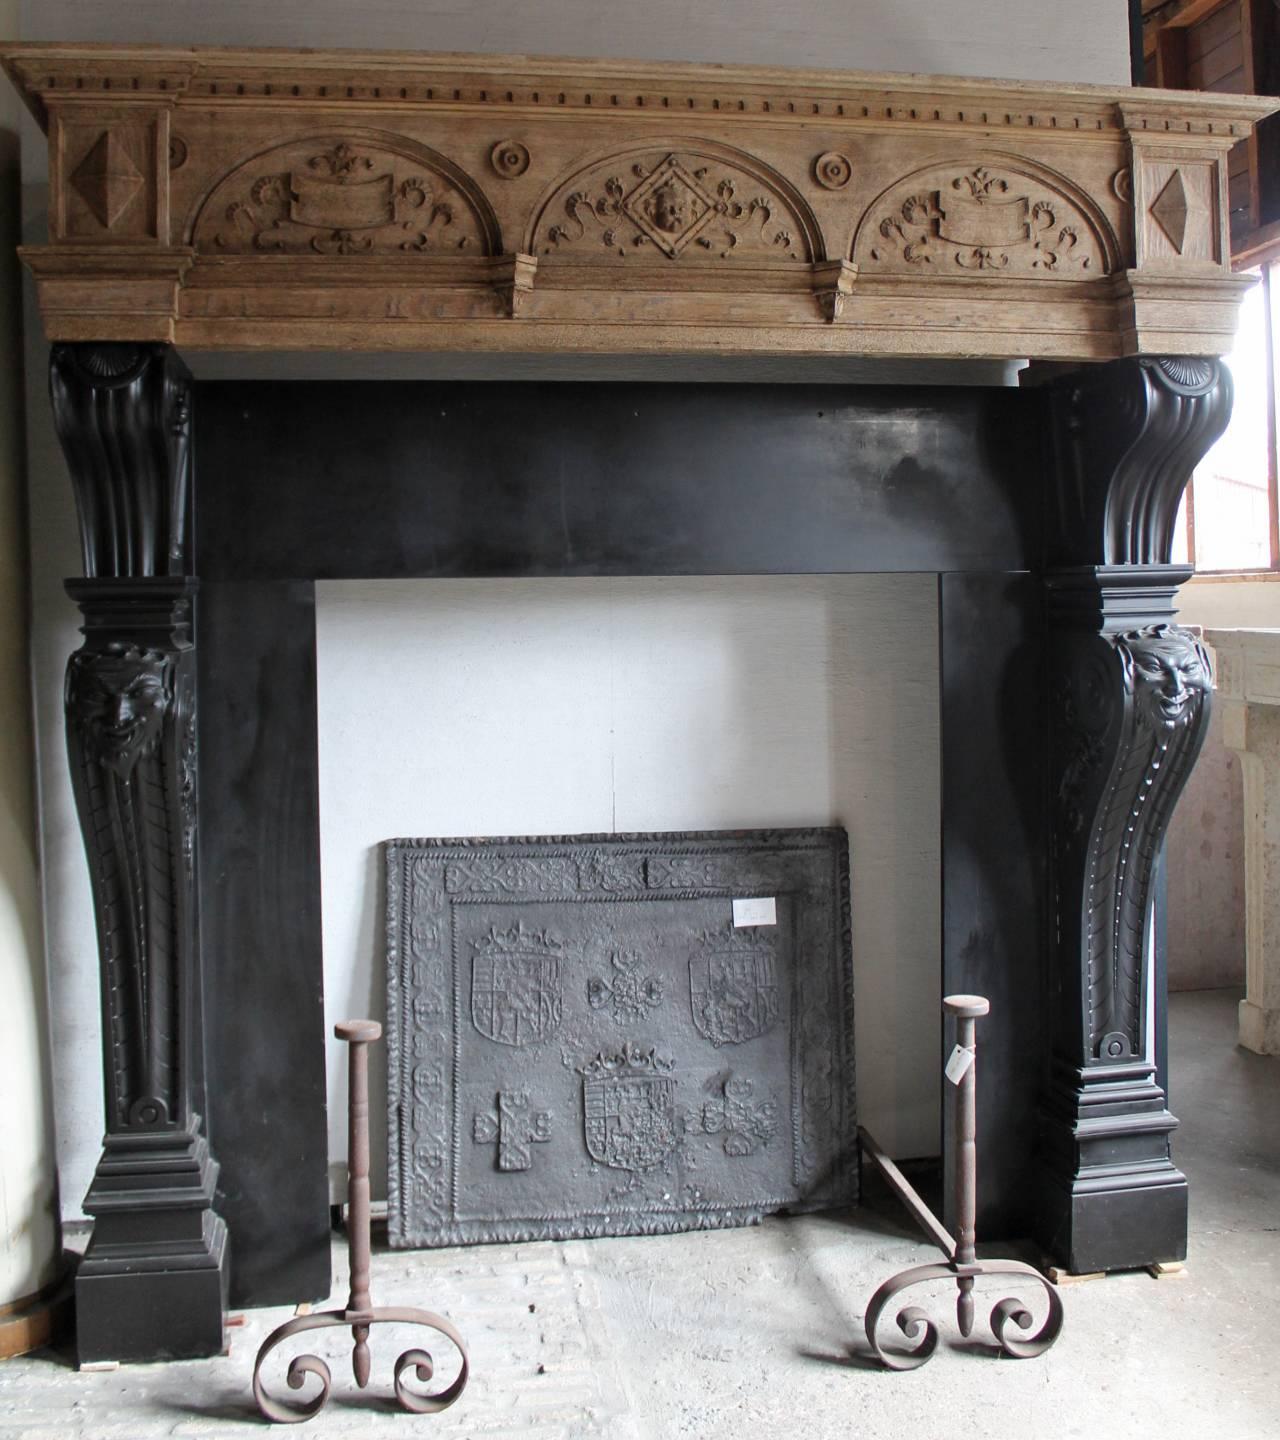 Very beautiful antique marble fireplace original
from Maastricht, the Netherlands.